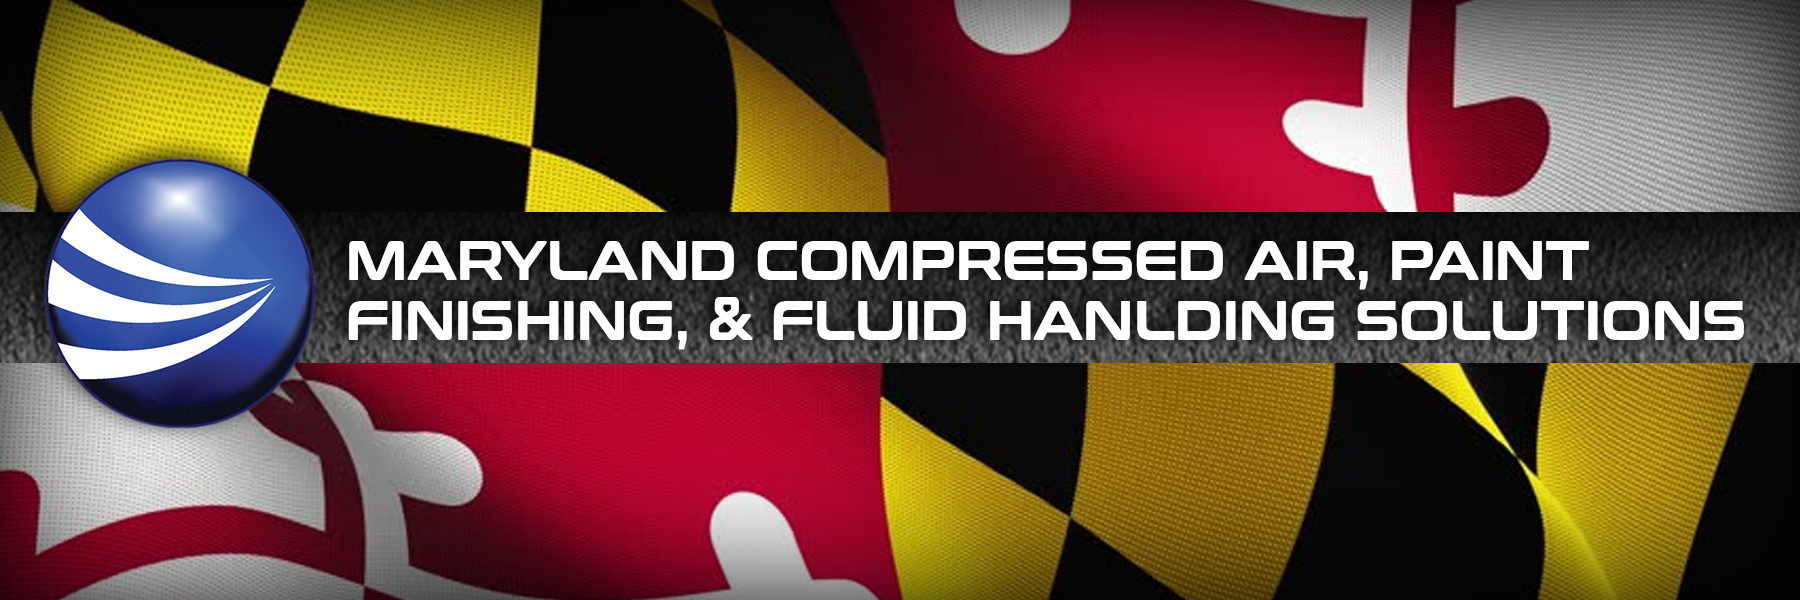 maryland compressed air service